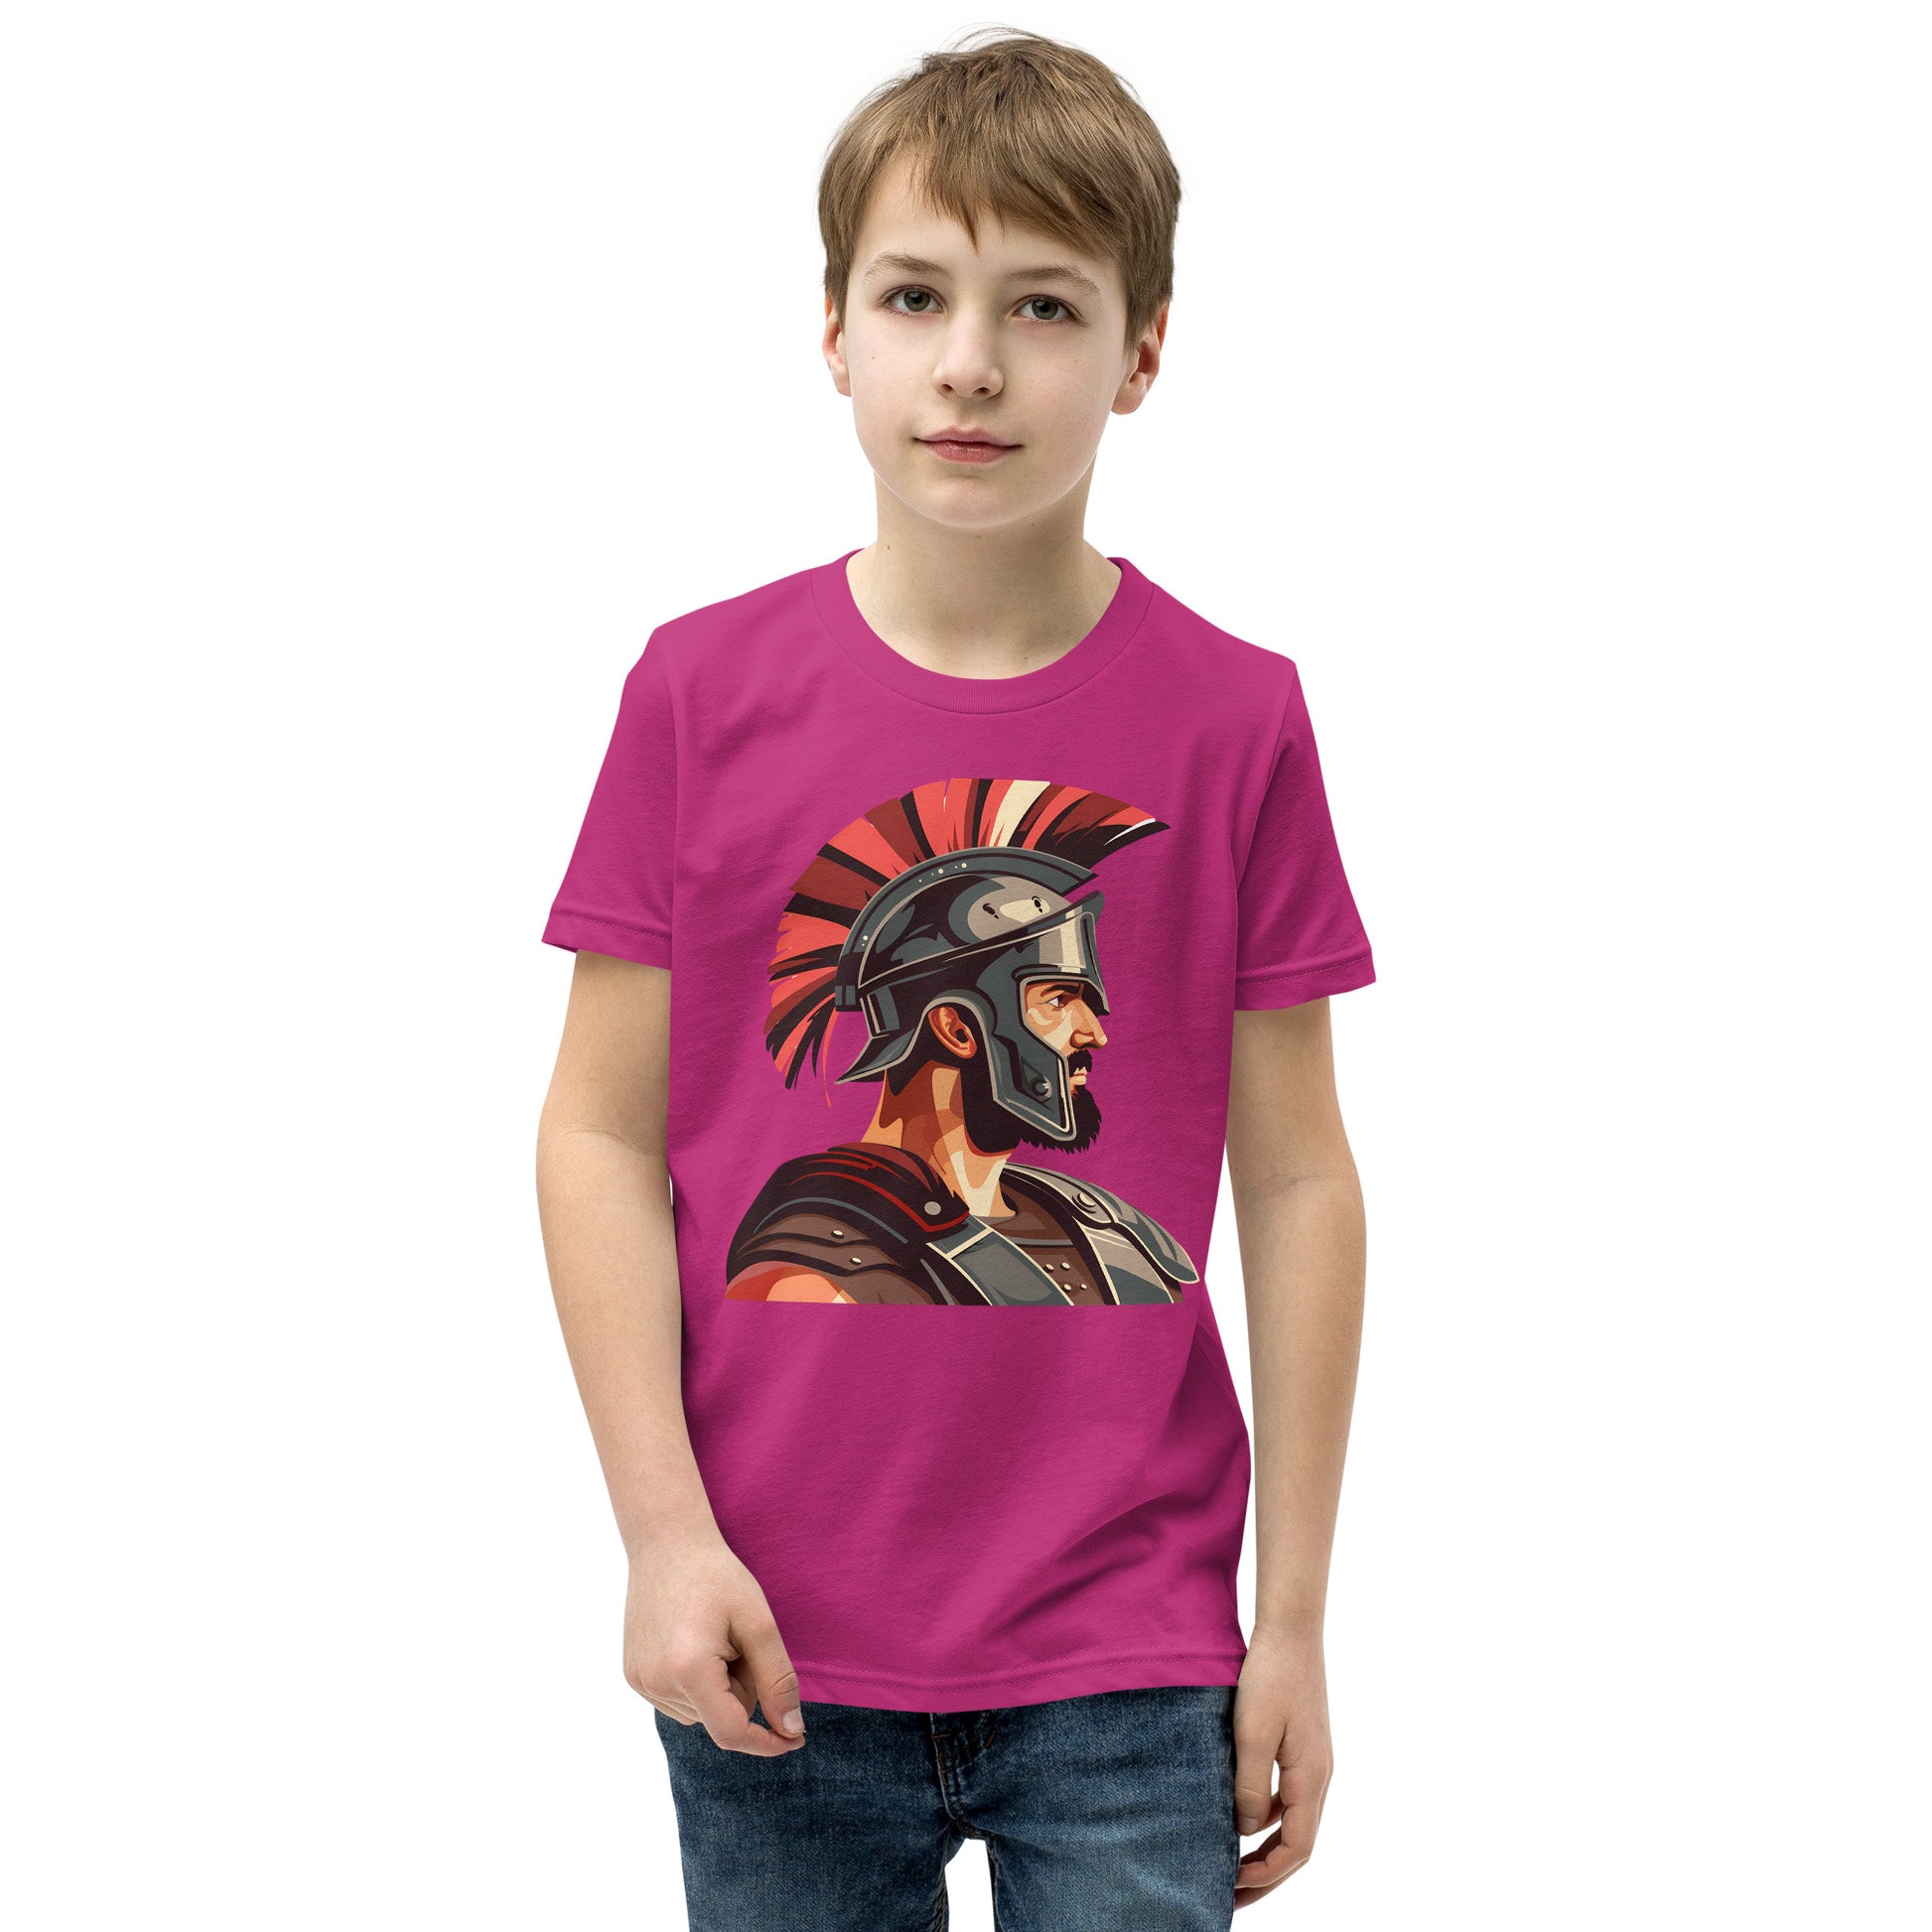 Teenager with a berry T-shirt with a print of a warrior